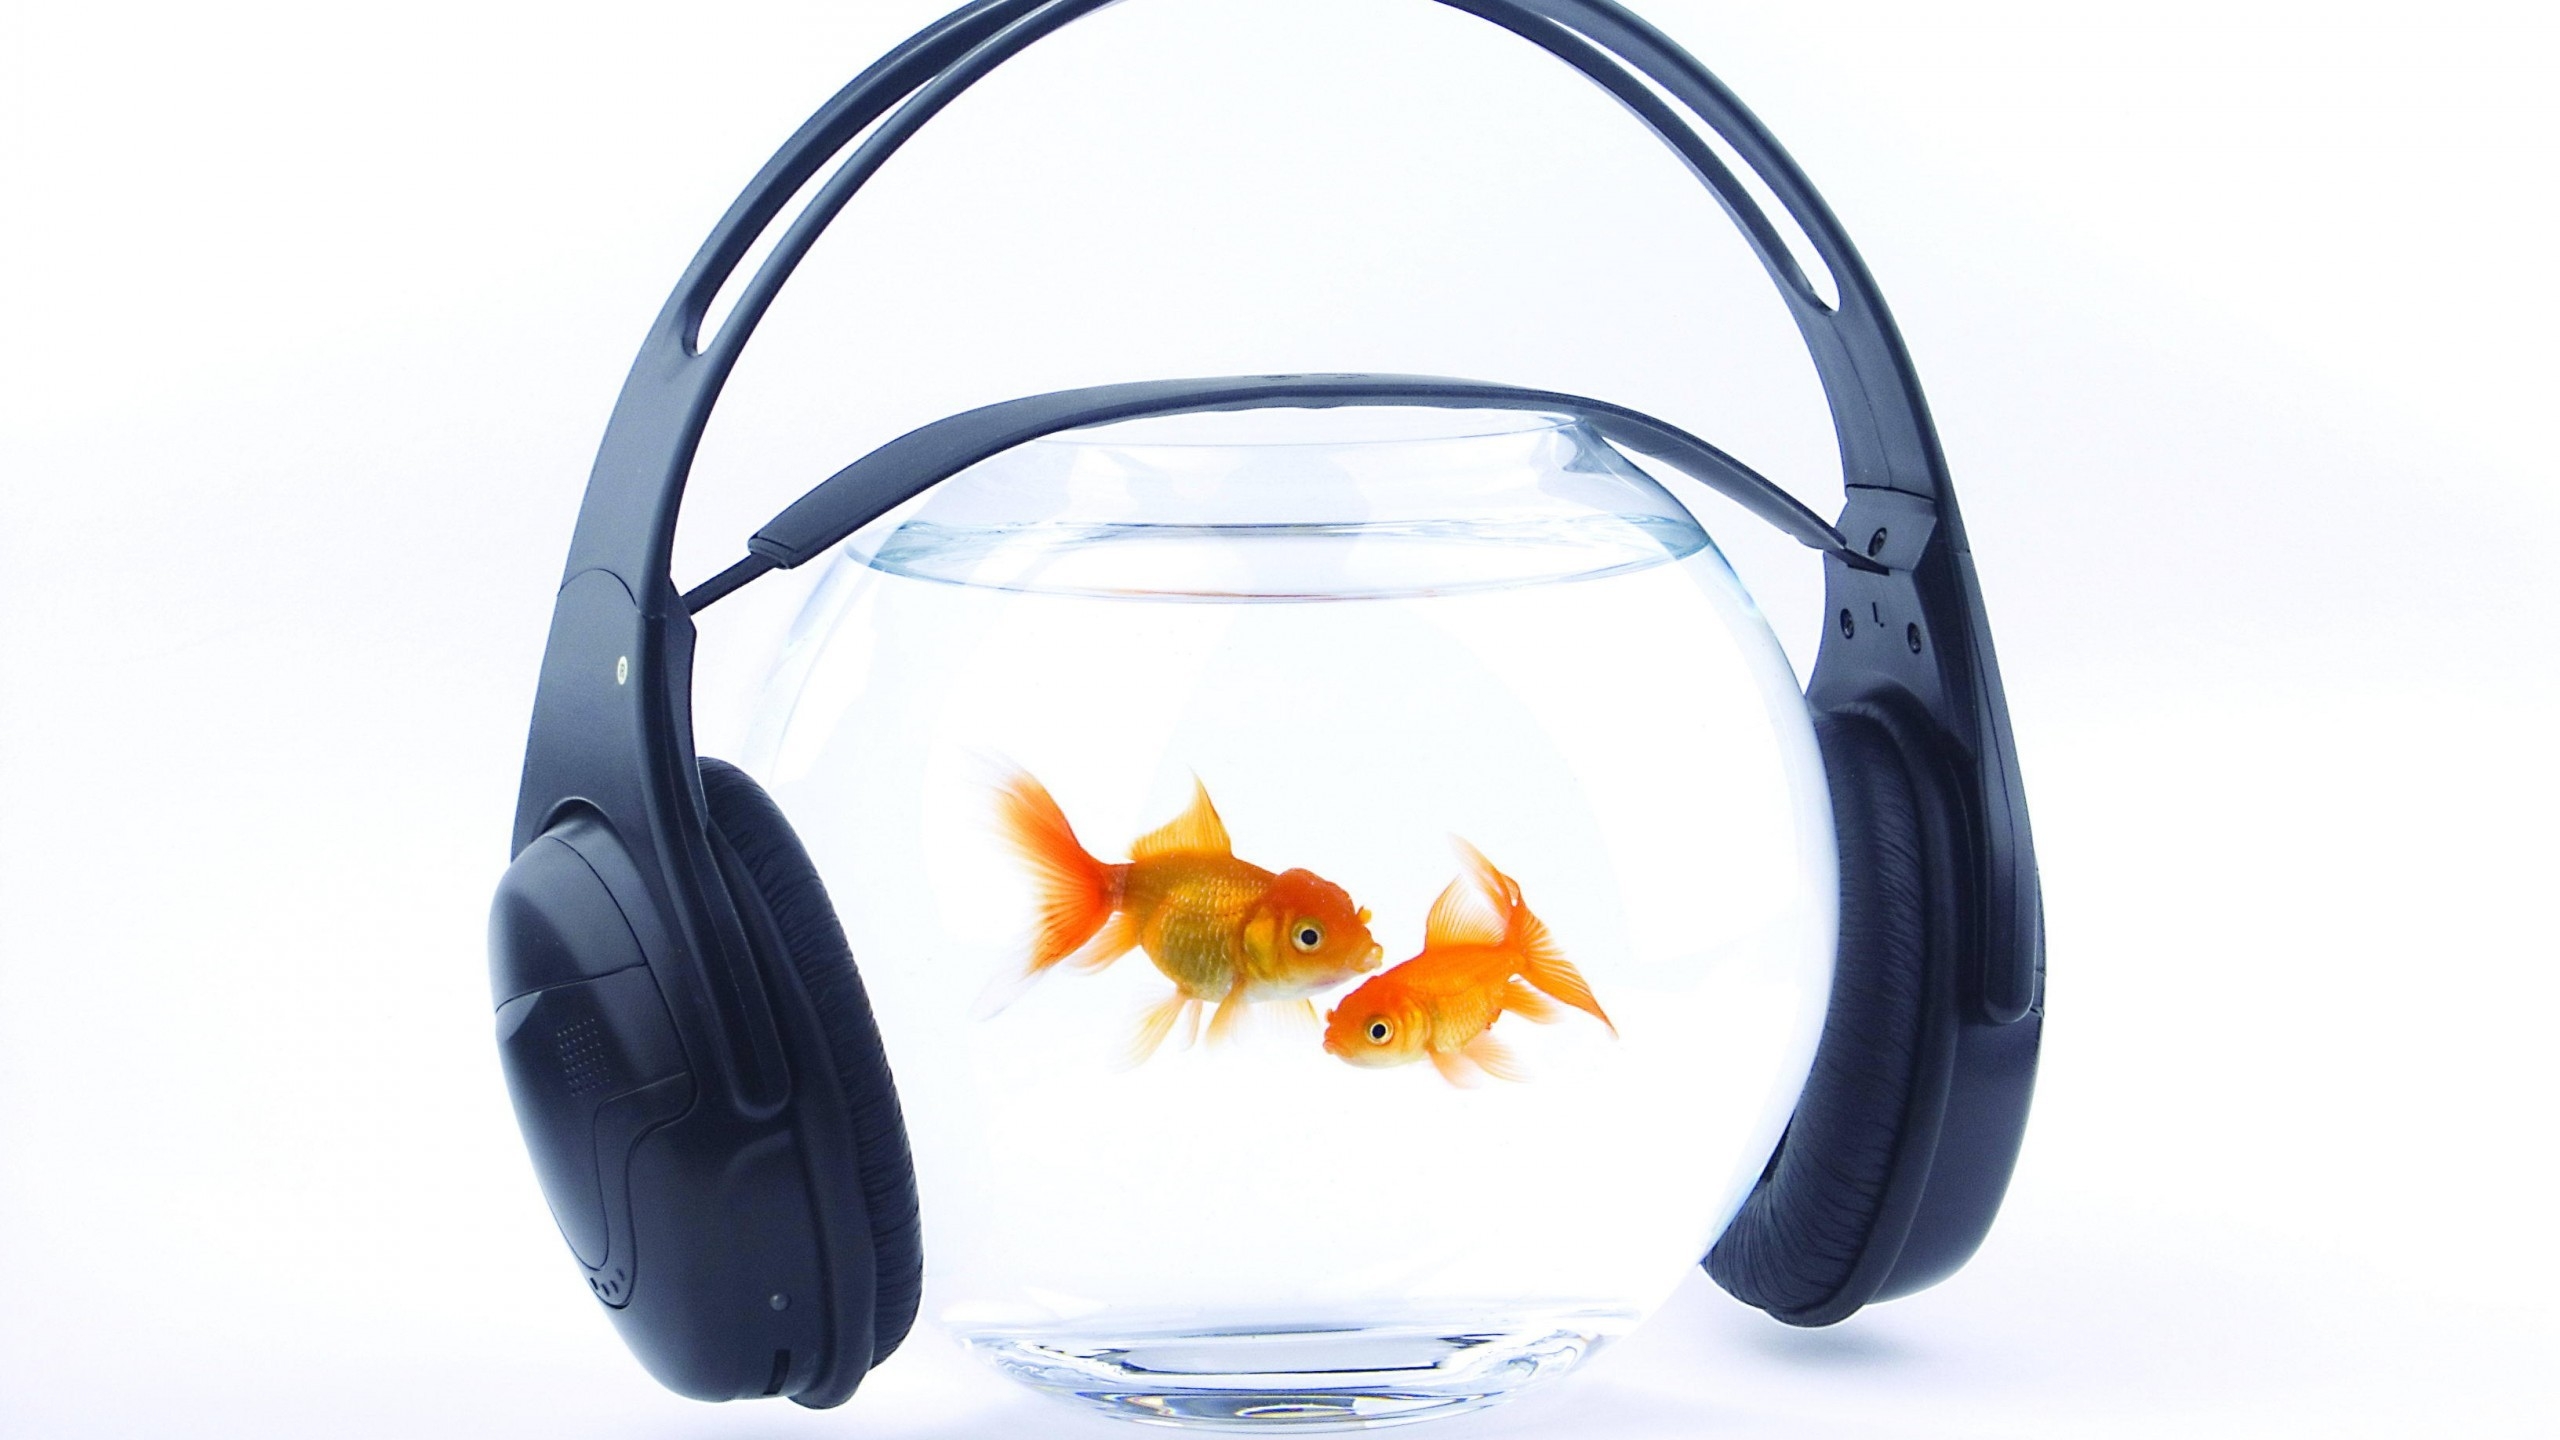 Music for Fishes for 2560x1440 HDTV resolution